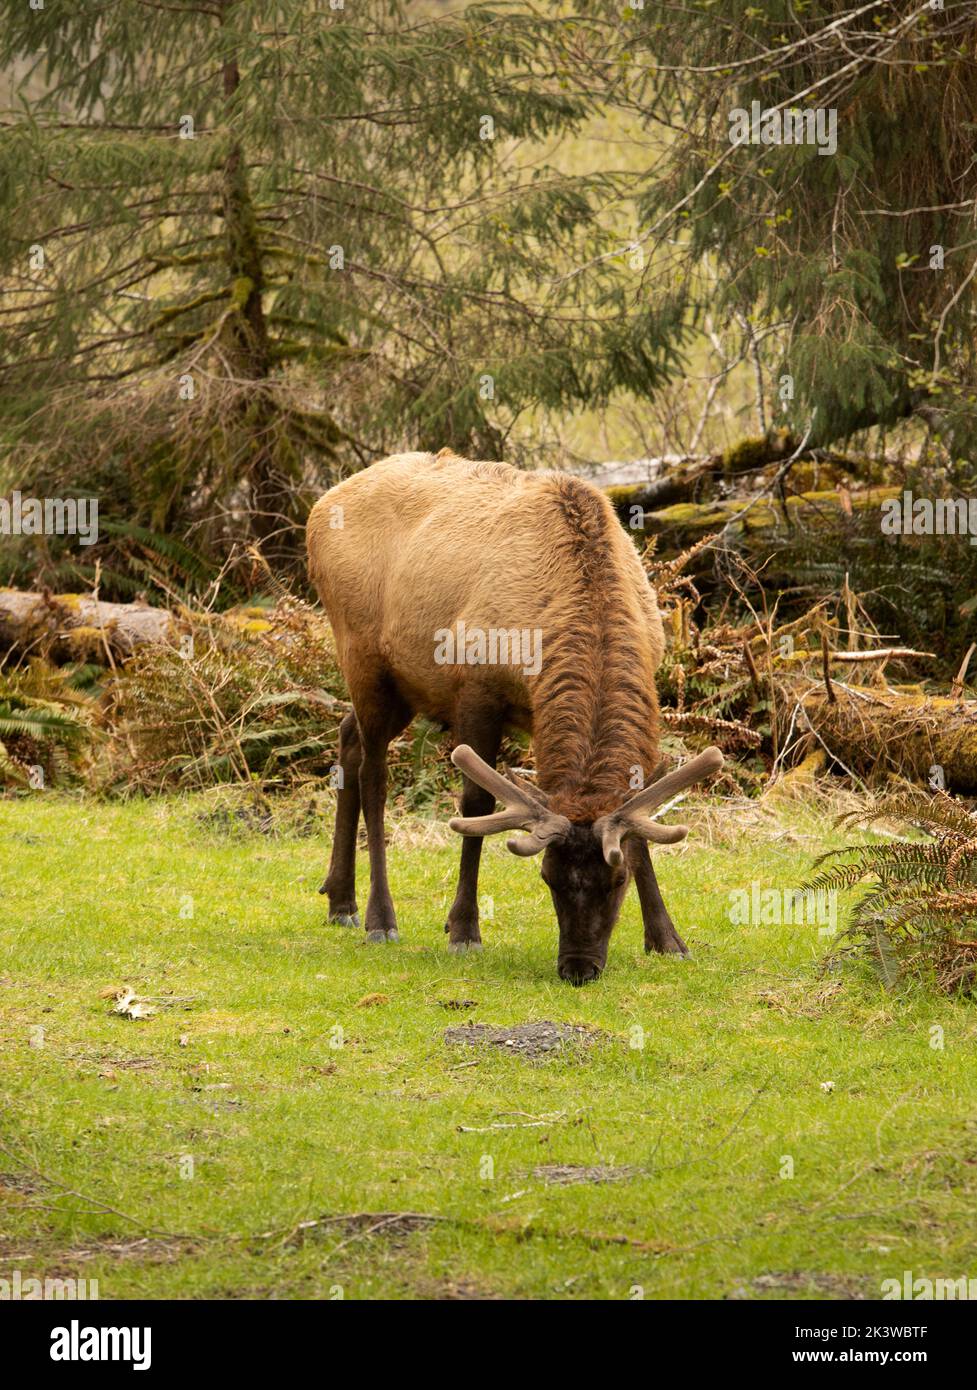 WA22092-00...WASHINGTON - Bull elk forging on the new growth at the Hoh Campground in Olympic National Park. Stock Photo